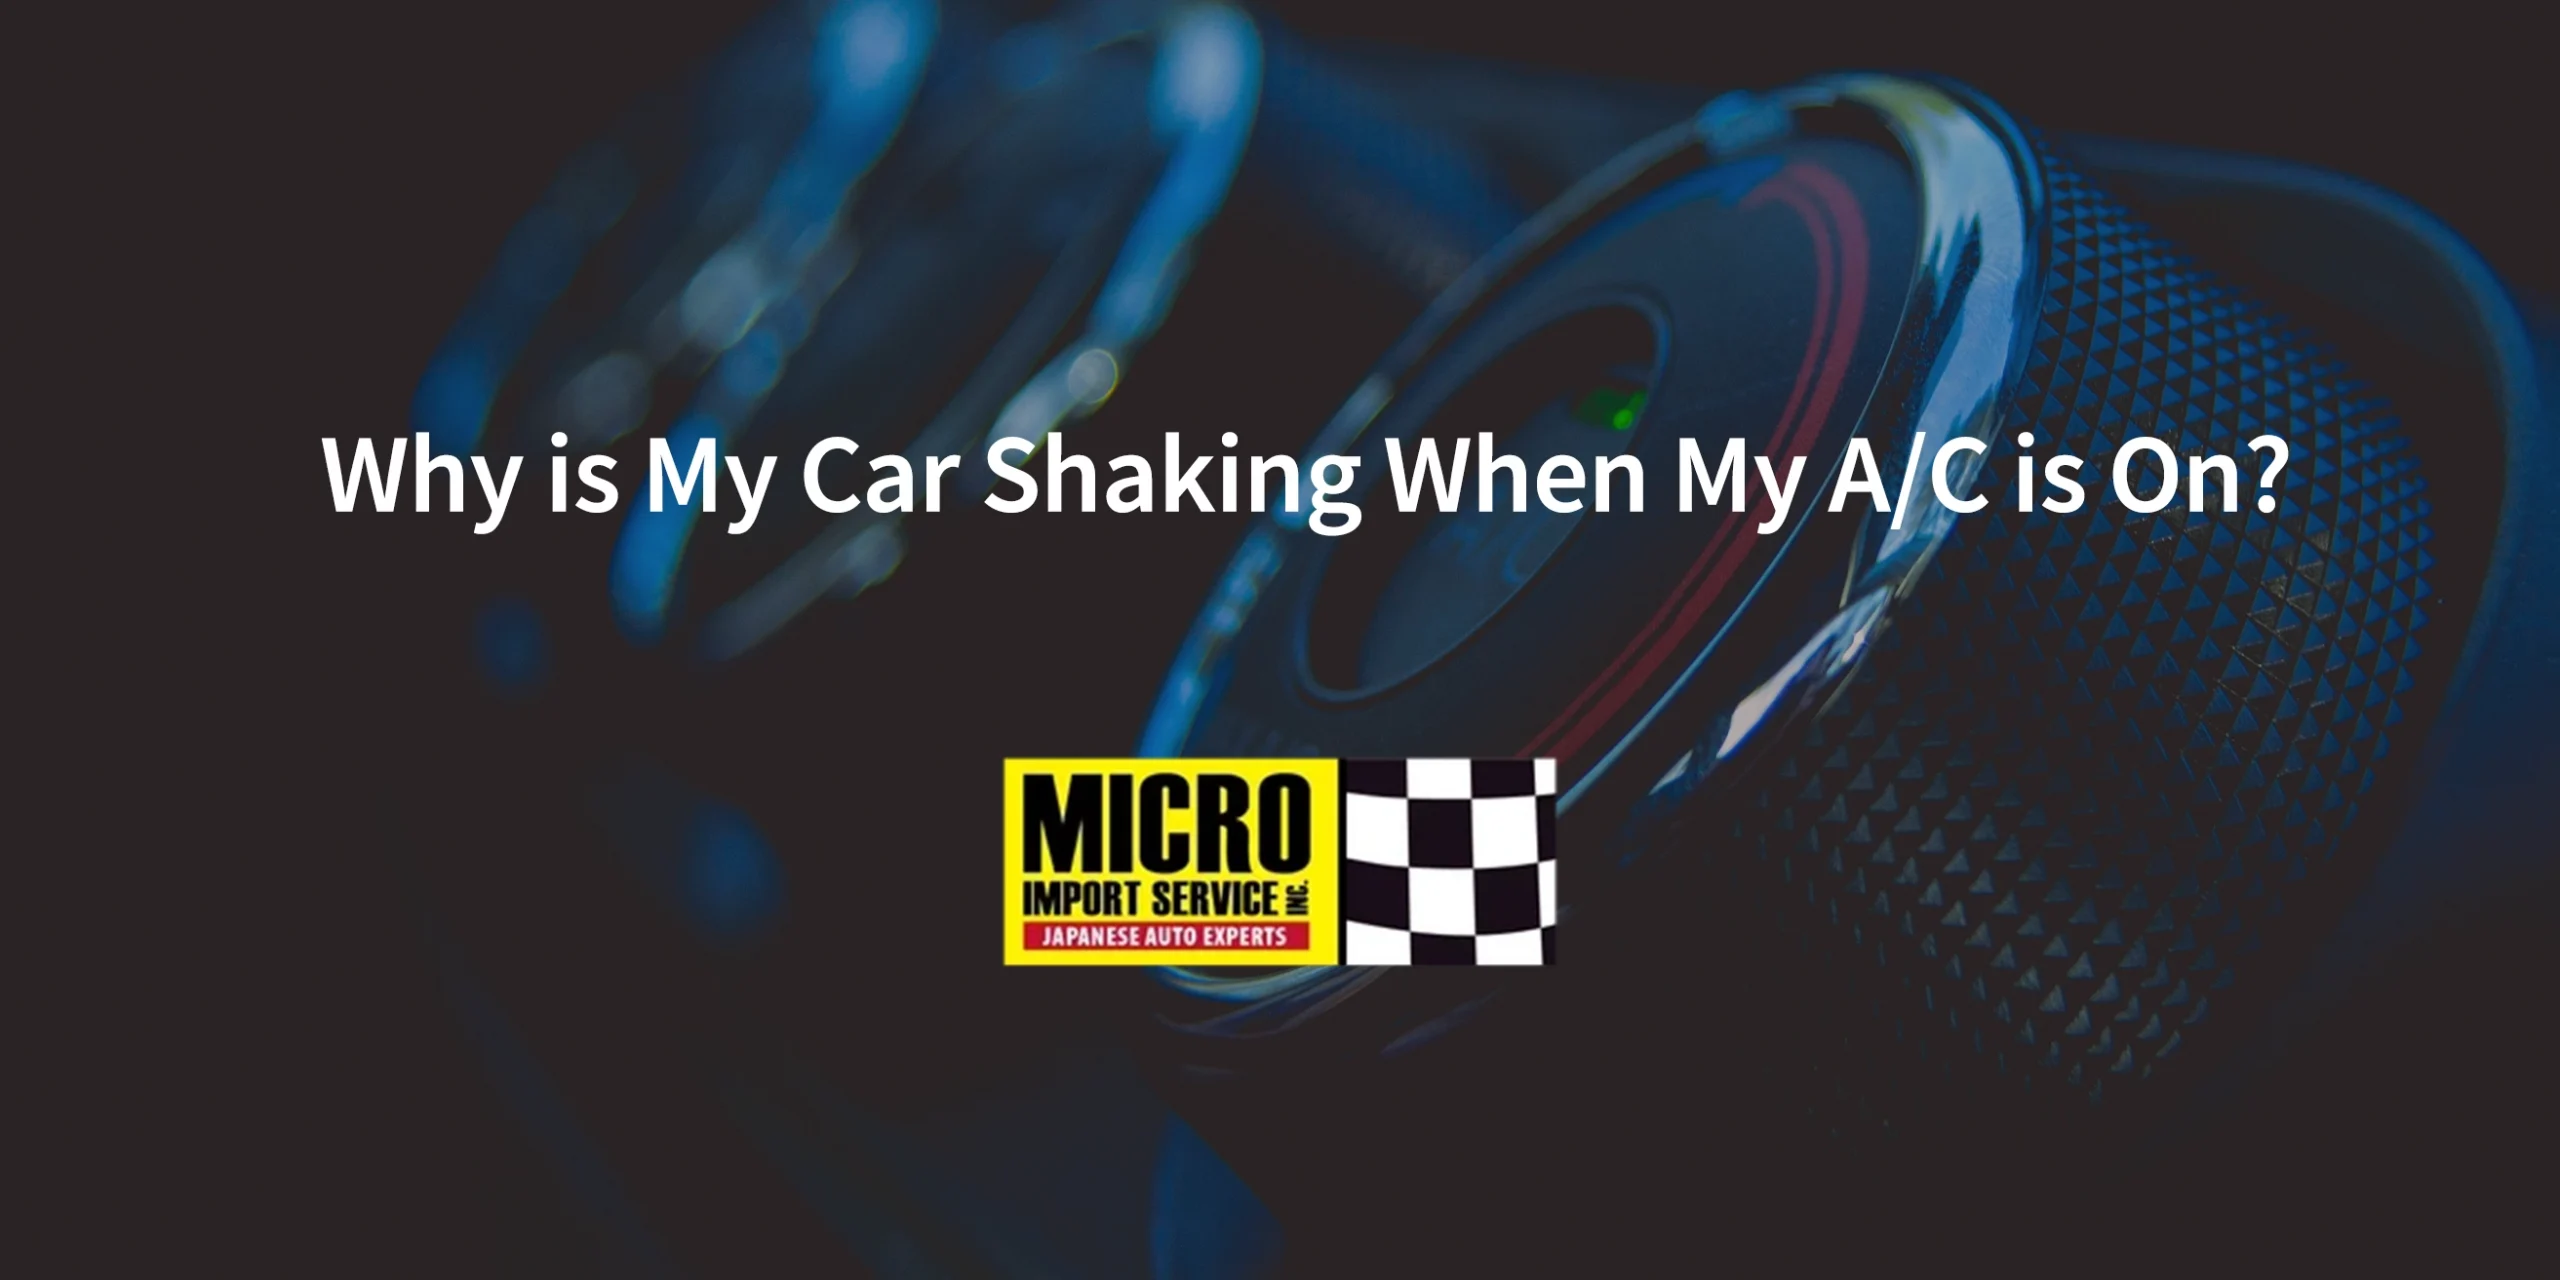 Why is My Car Shaking When My A/C is On?